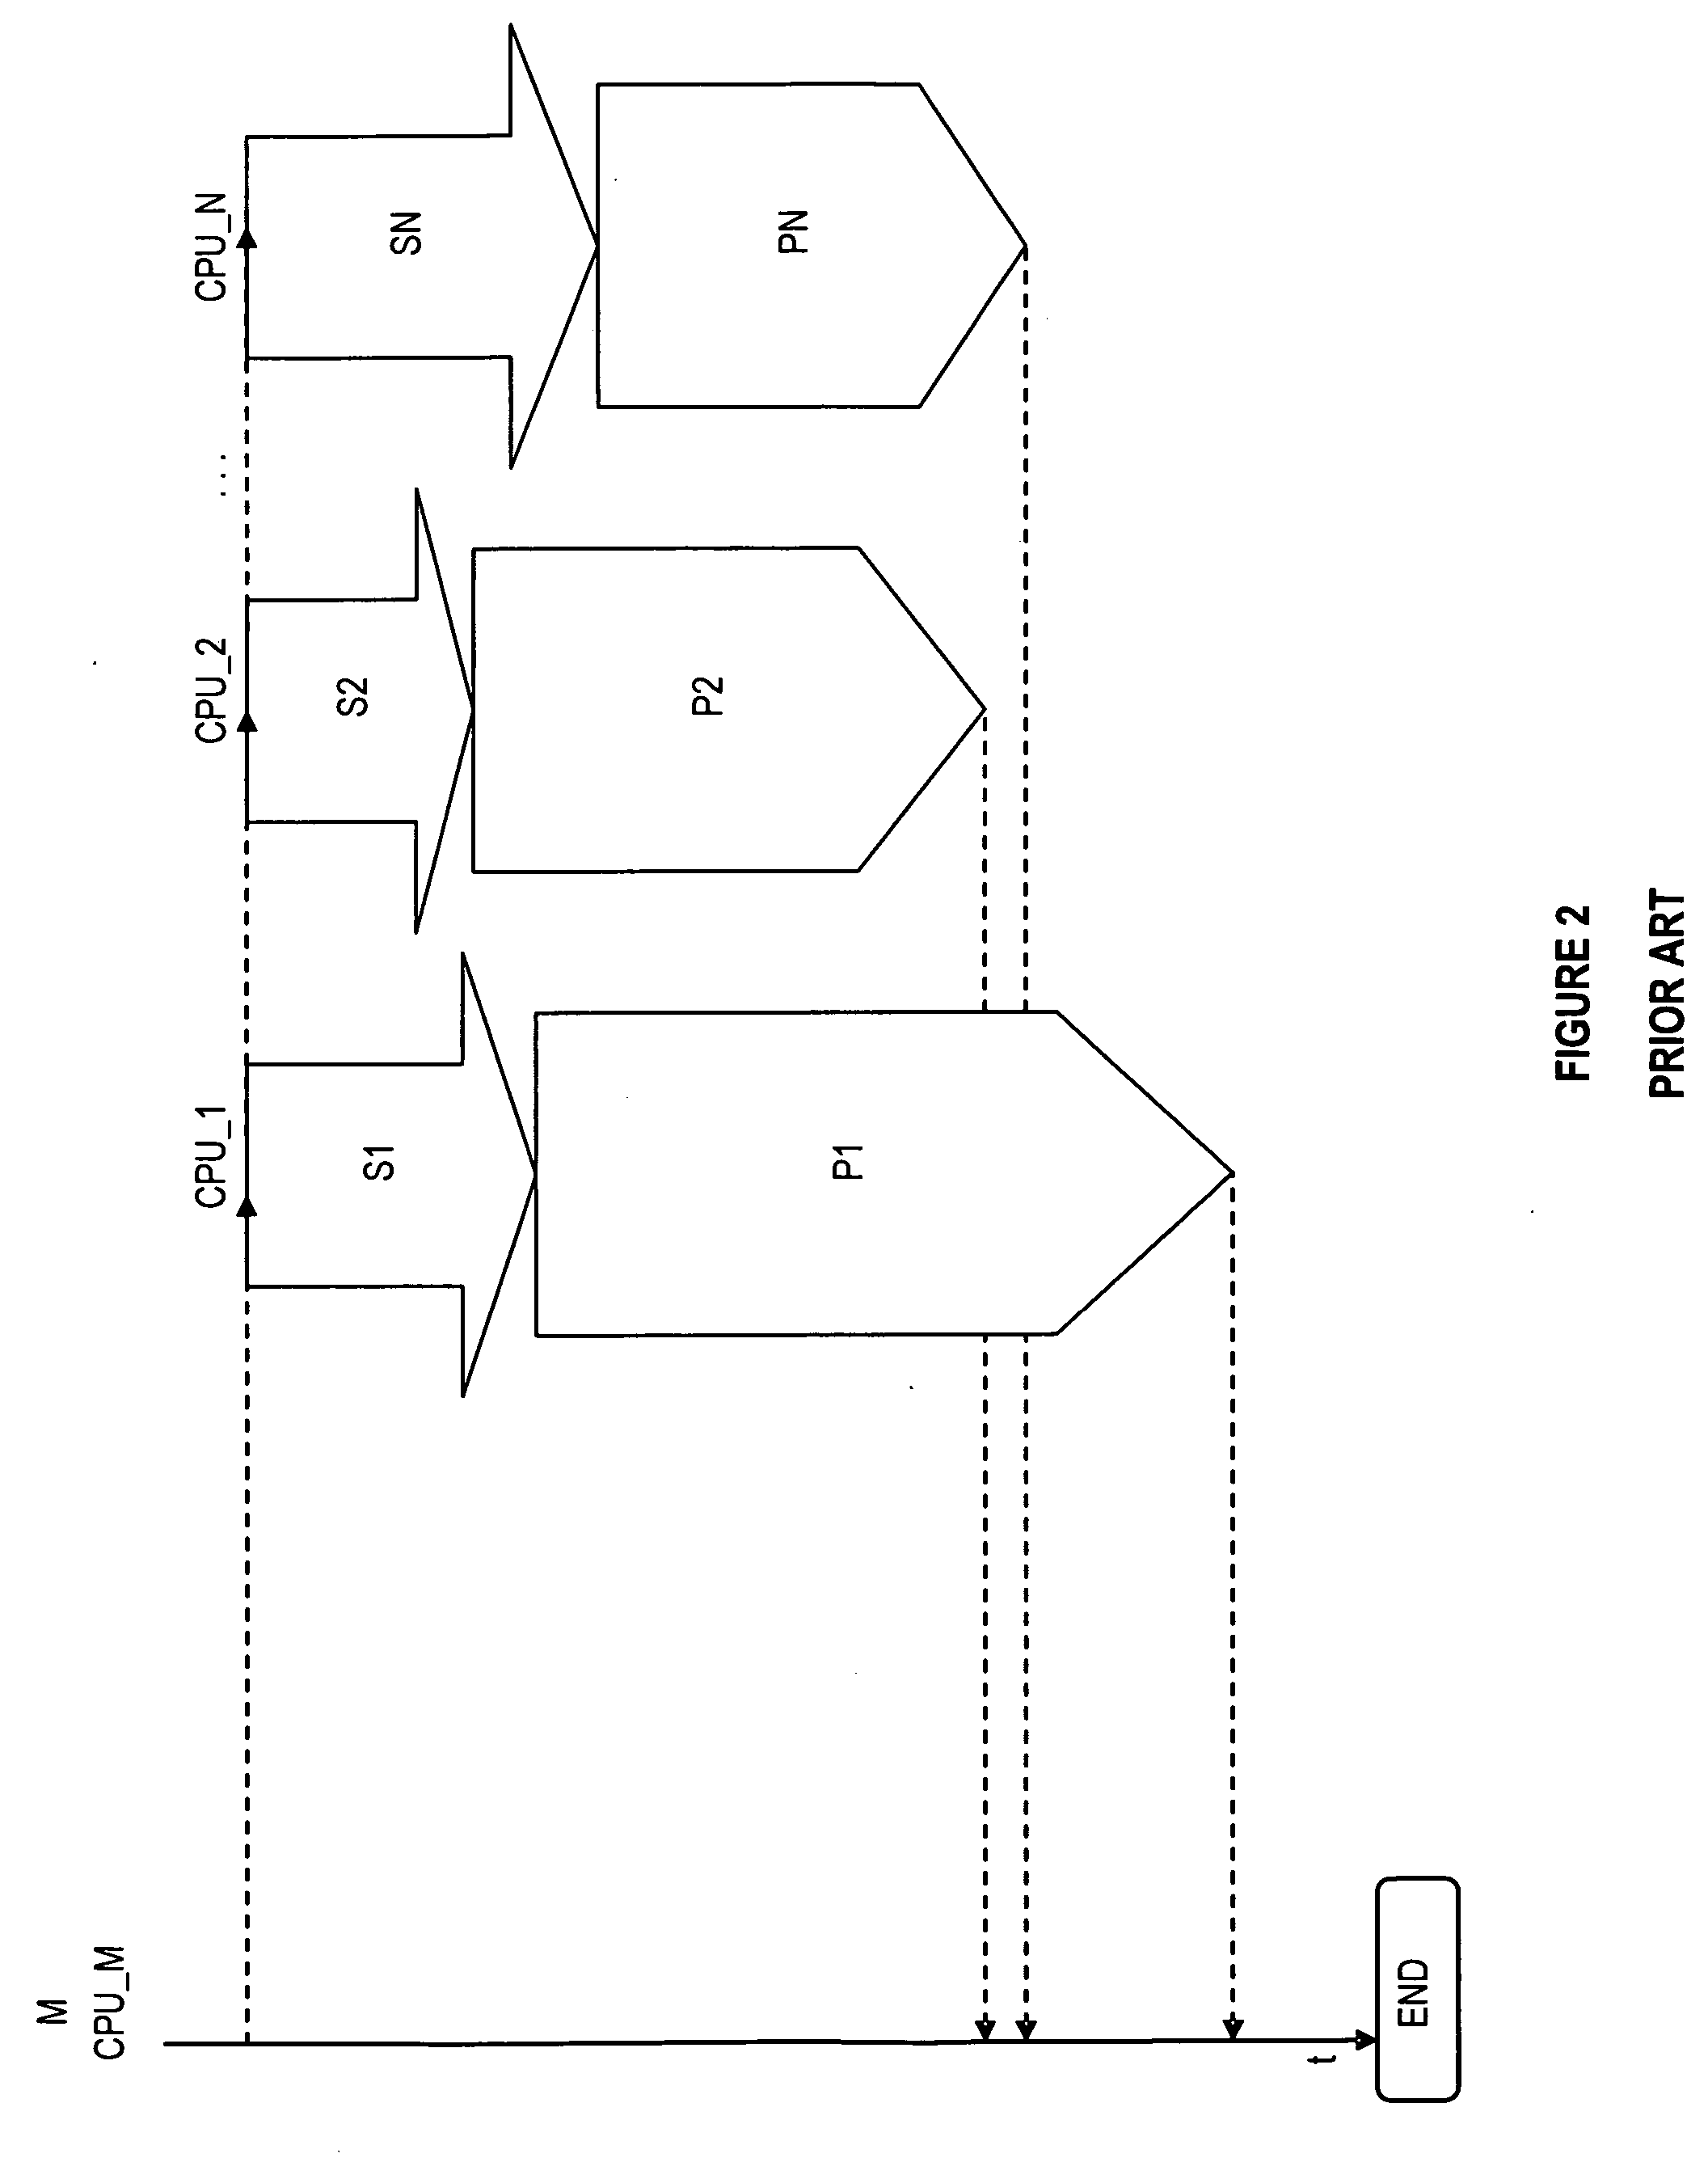 Method and system for cascaded processing a plurality of data objects